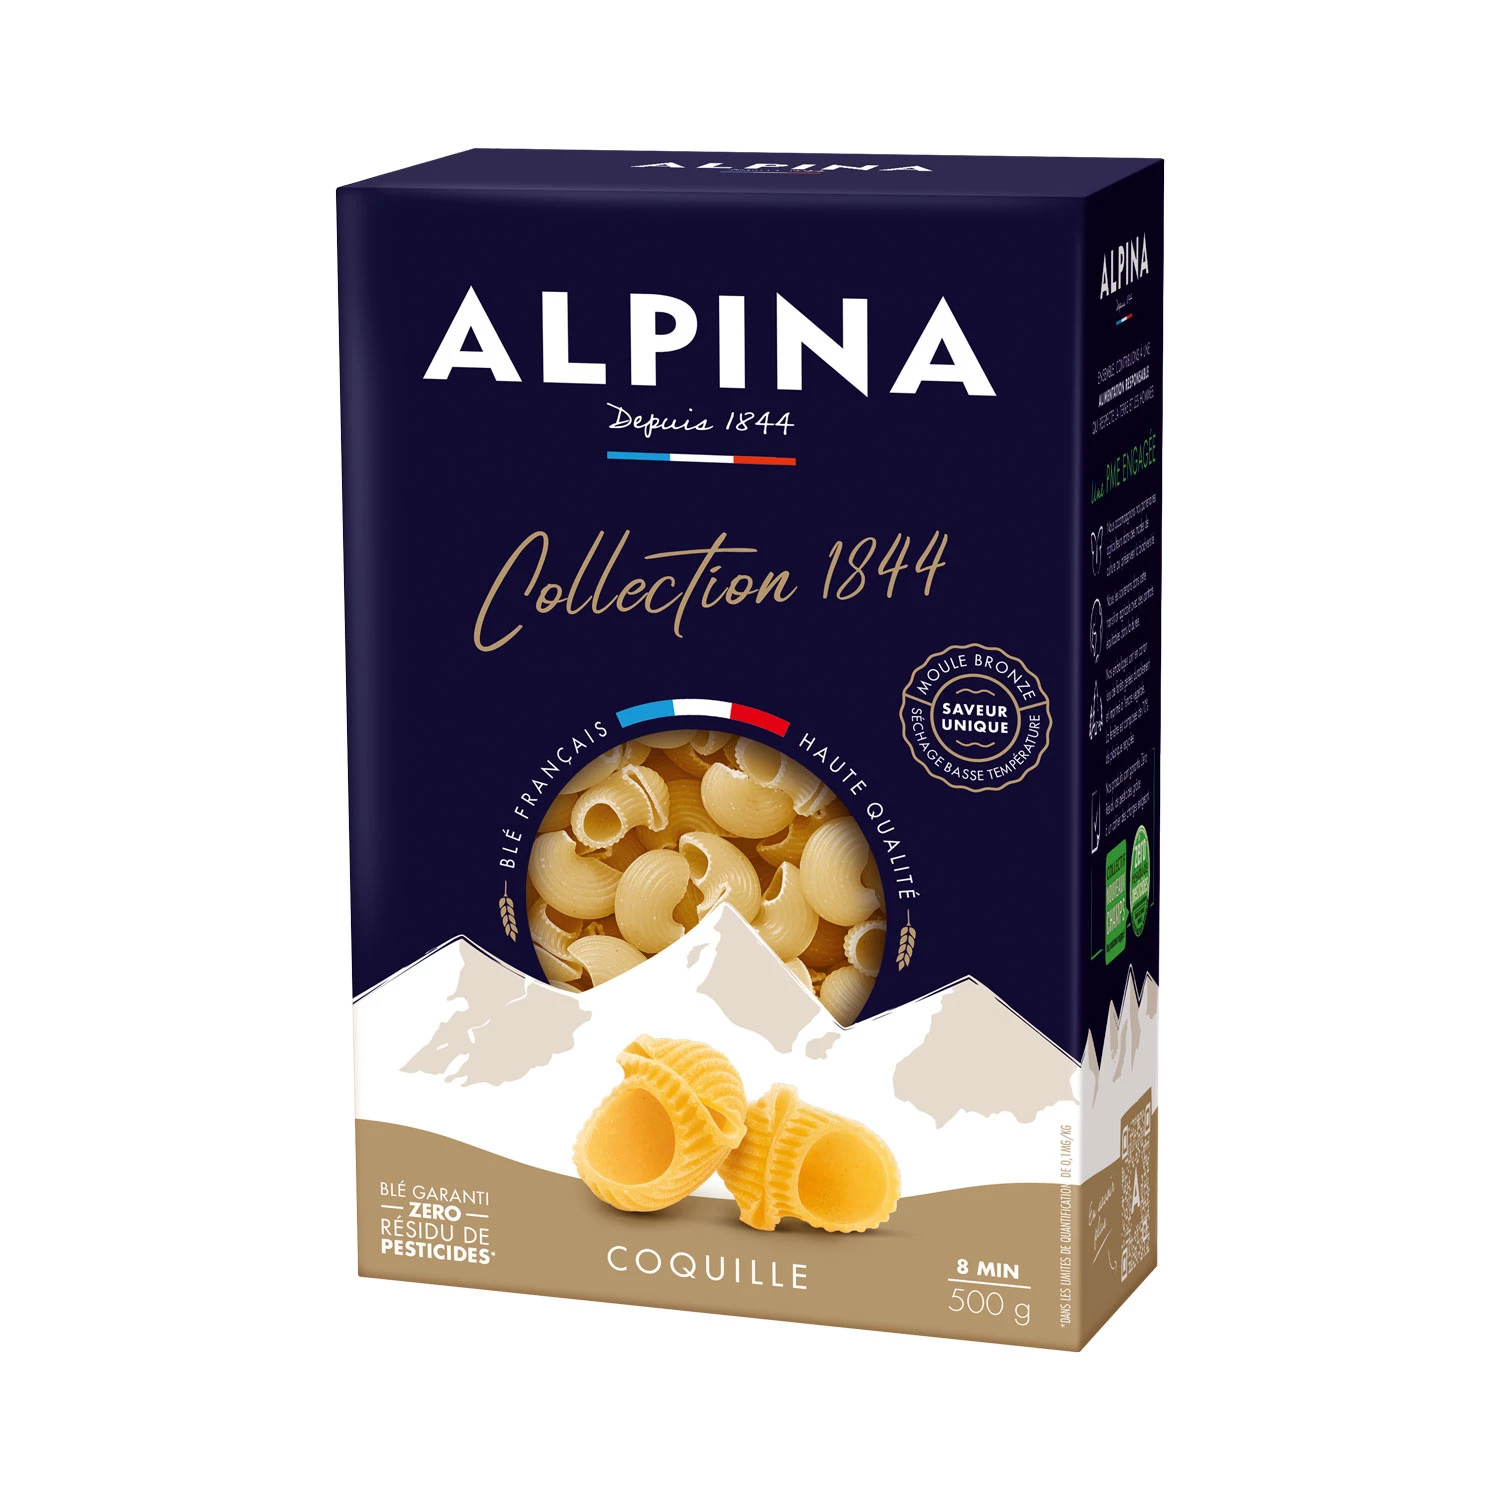 Shell The Collection, 500g - ALPINA